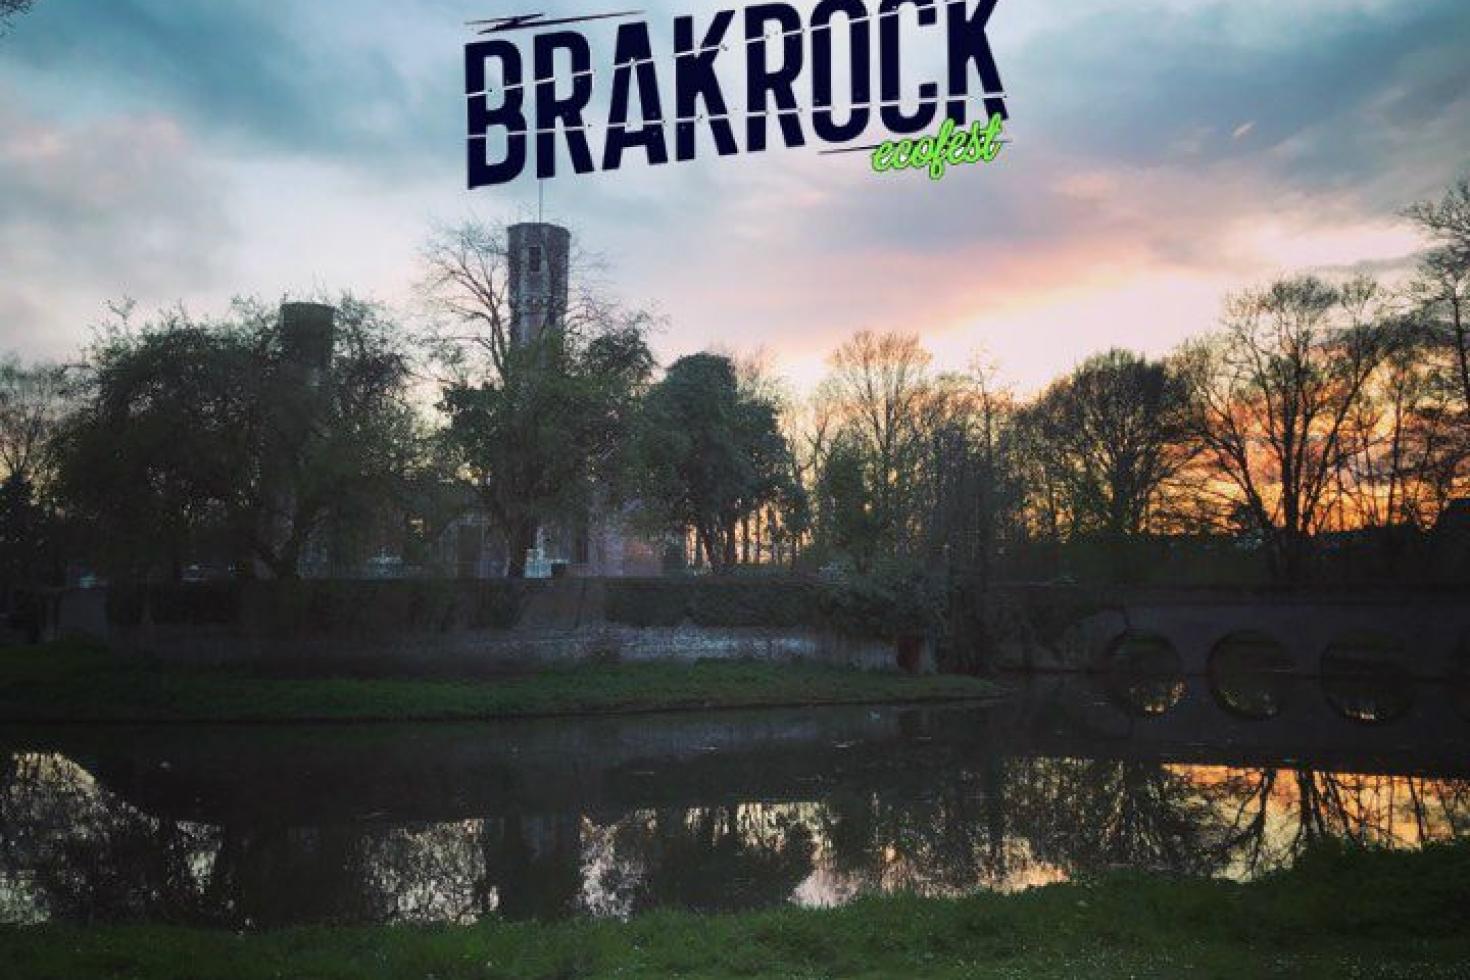 Six less known facts about Brakrock